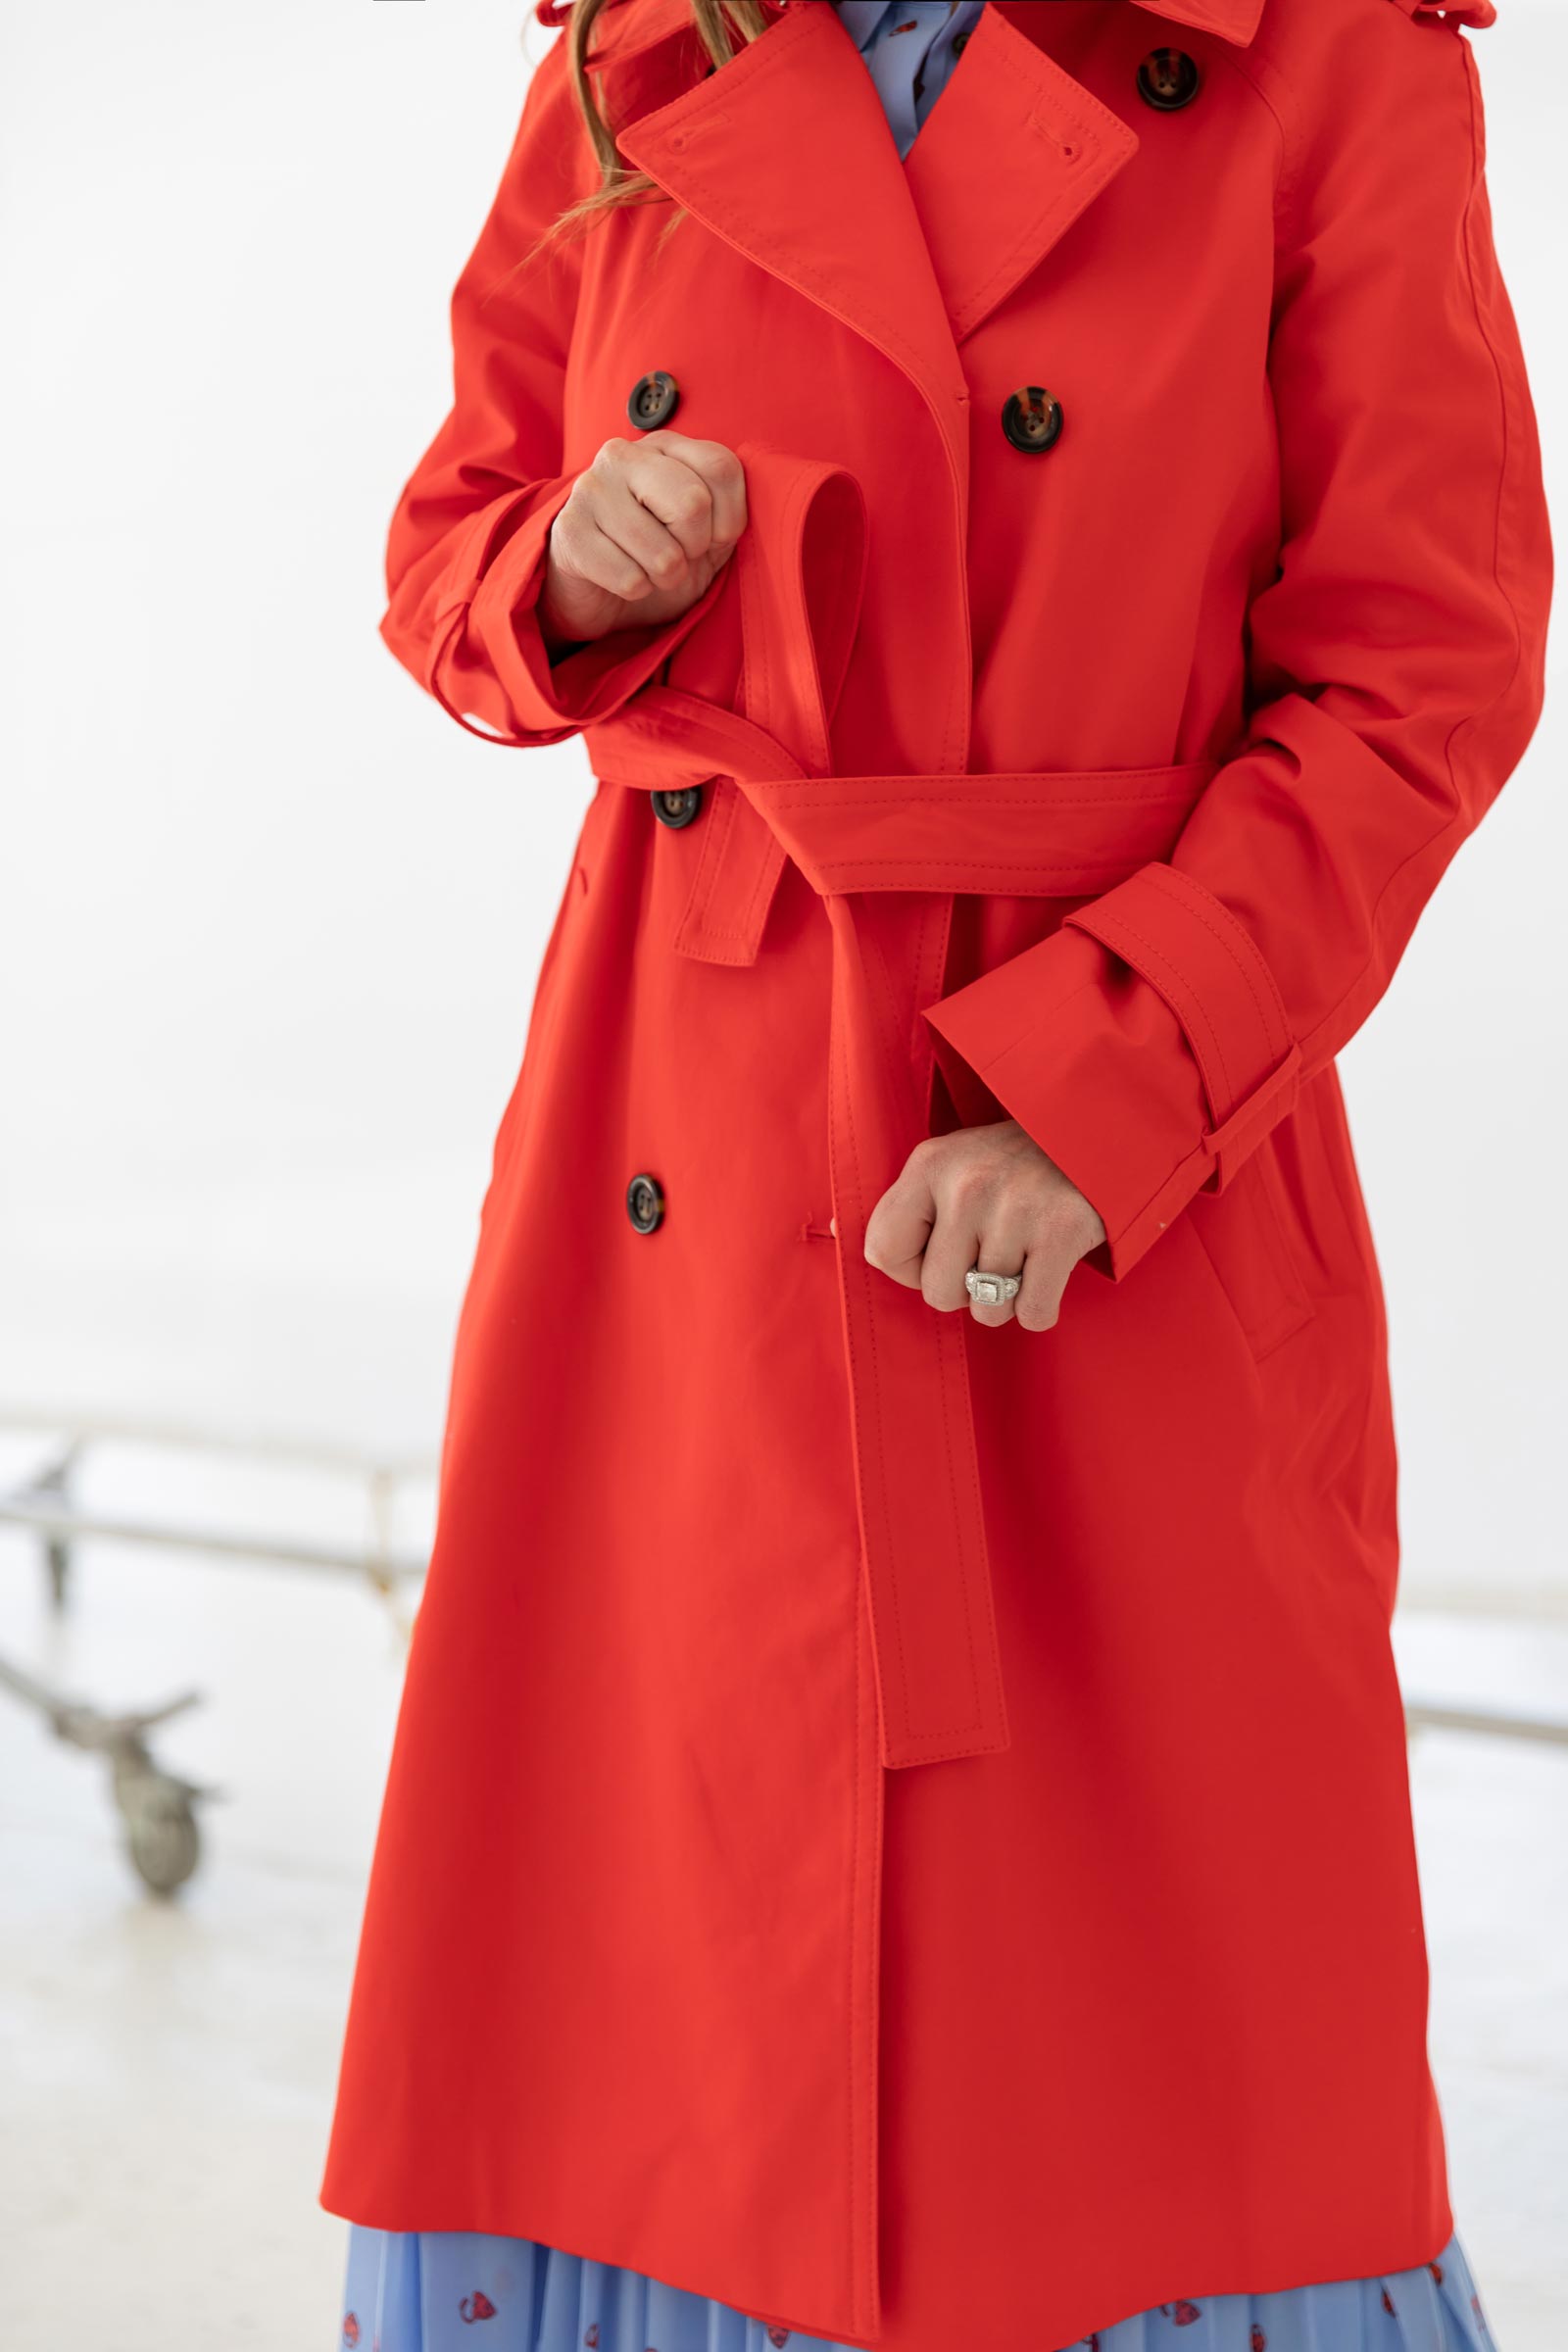 Ann Taylor Red Trench Coat